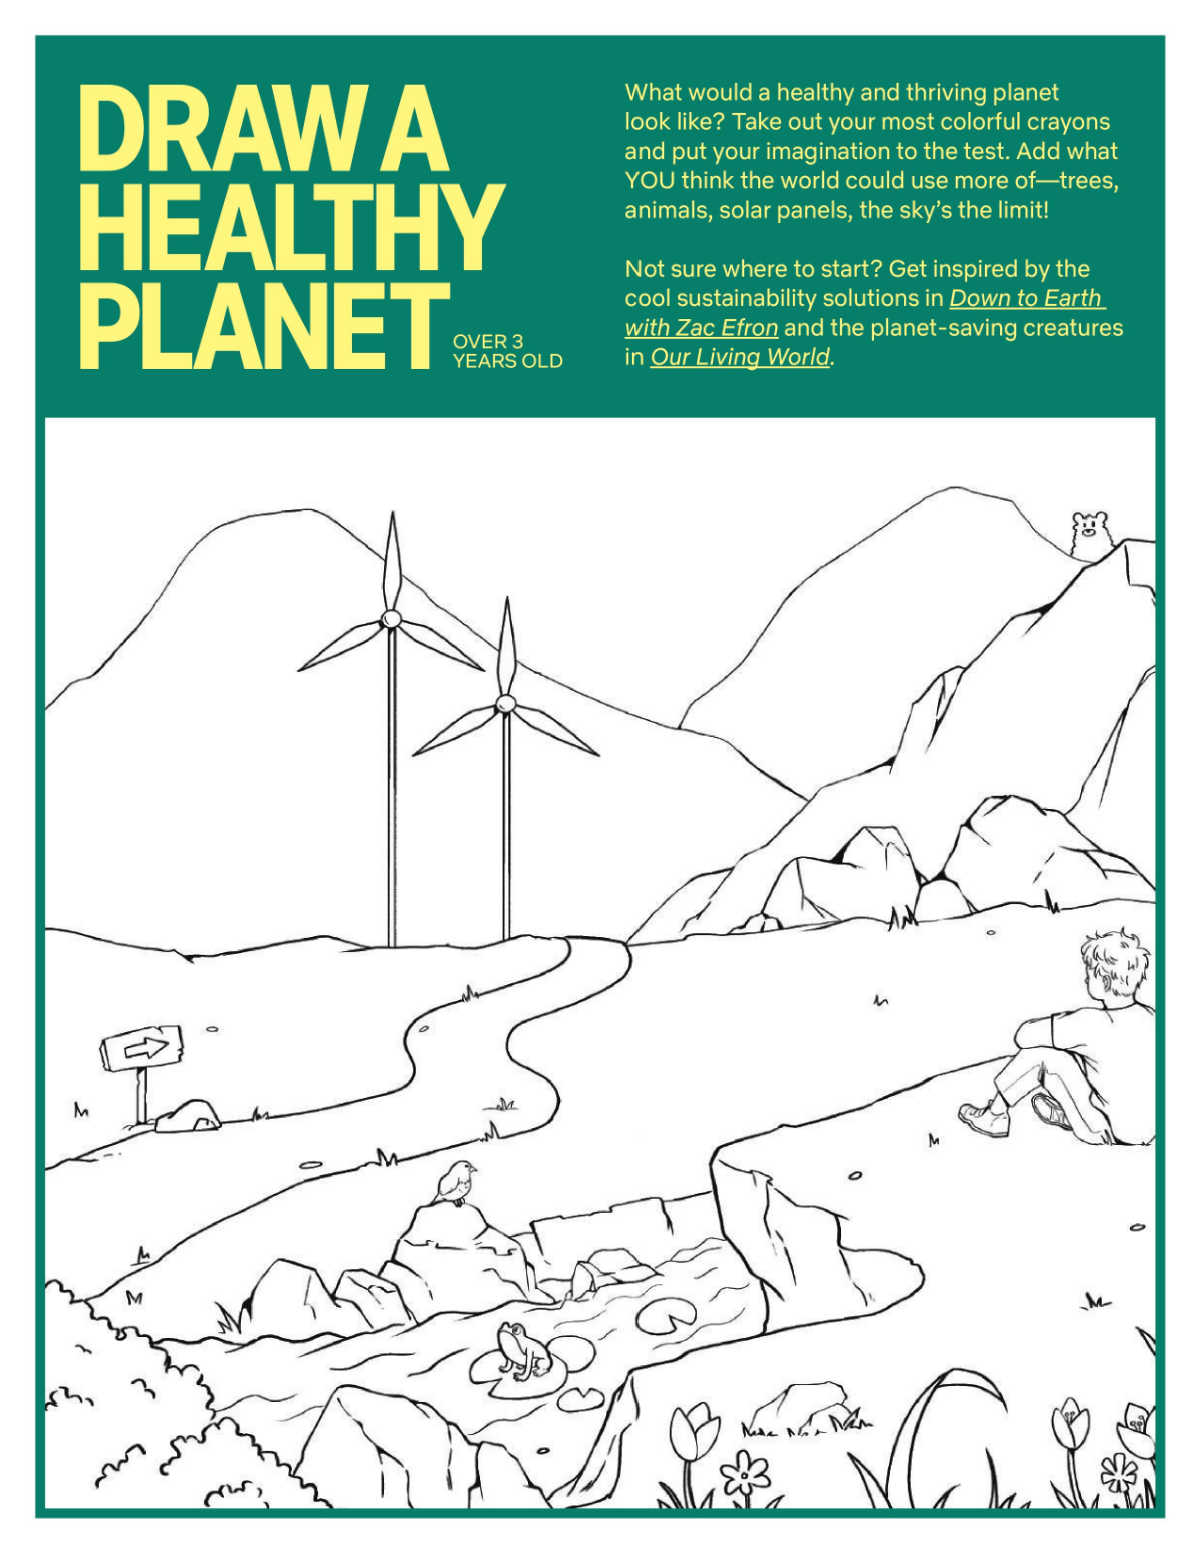 15 healthy planet coloring page